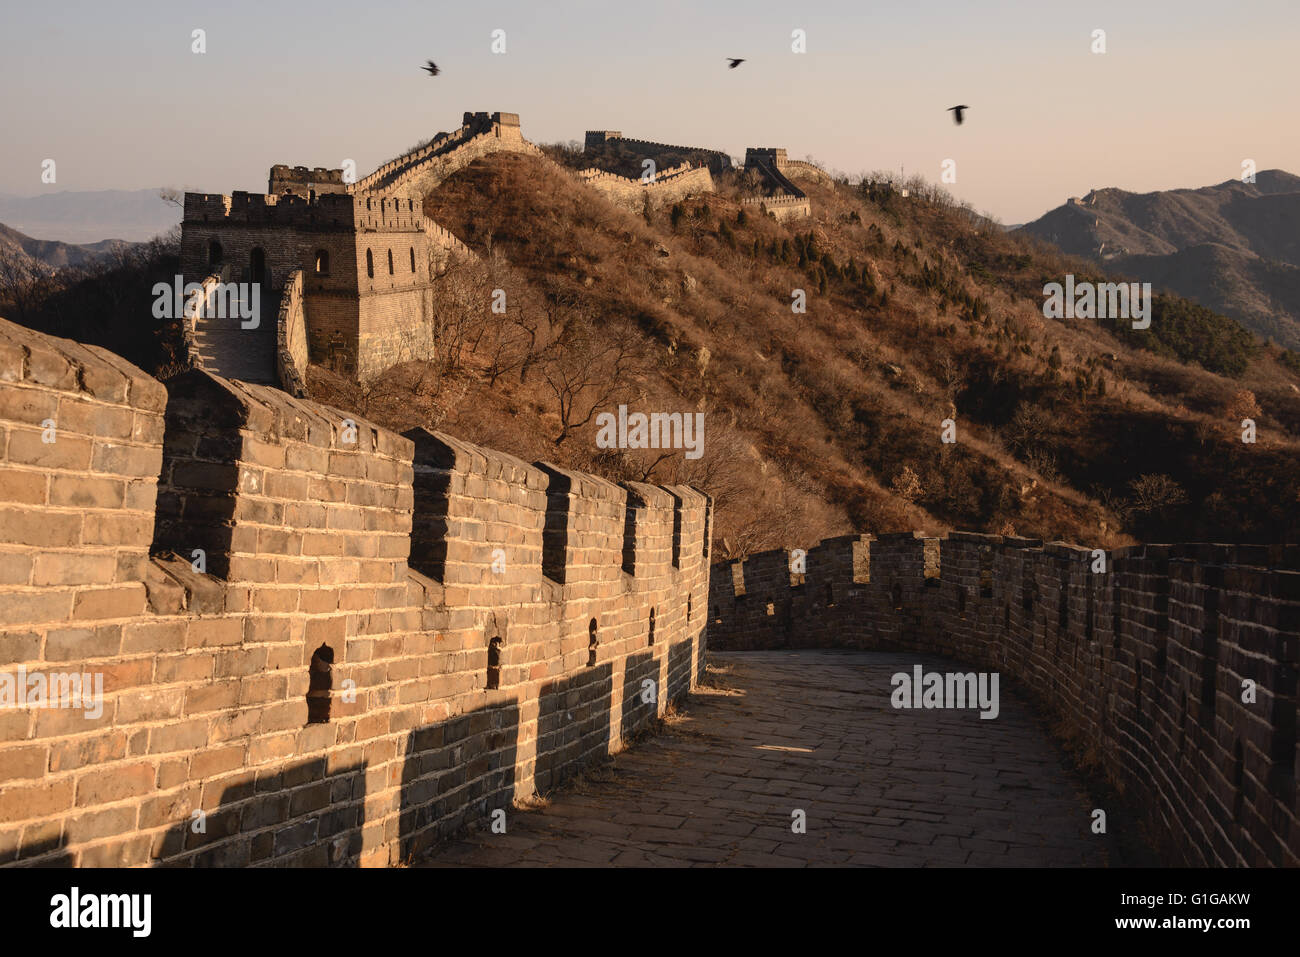 Watch towers on the Mutianyu section of the Great wall of China Stock Photo